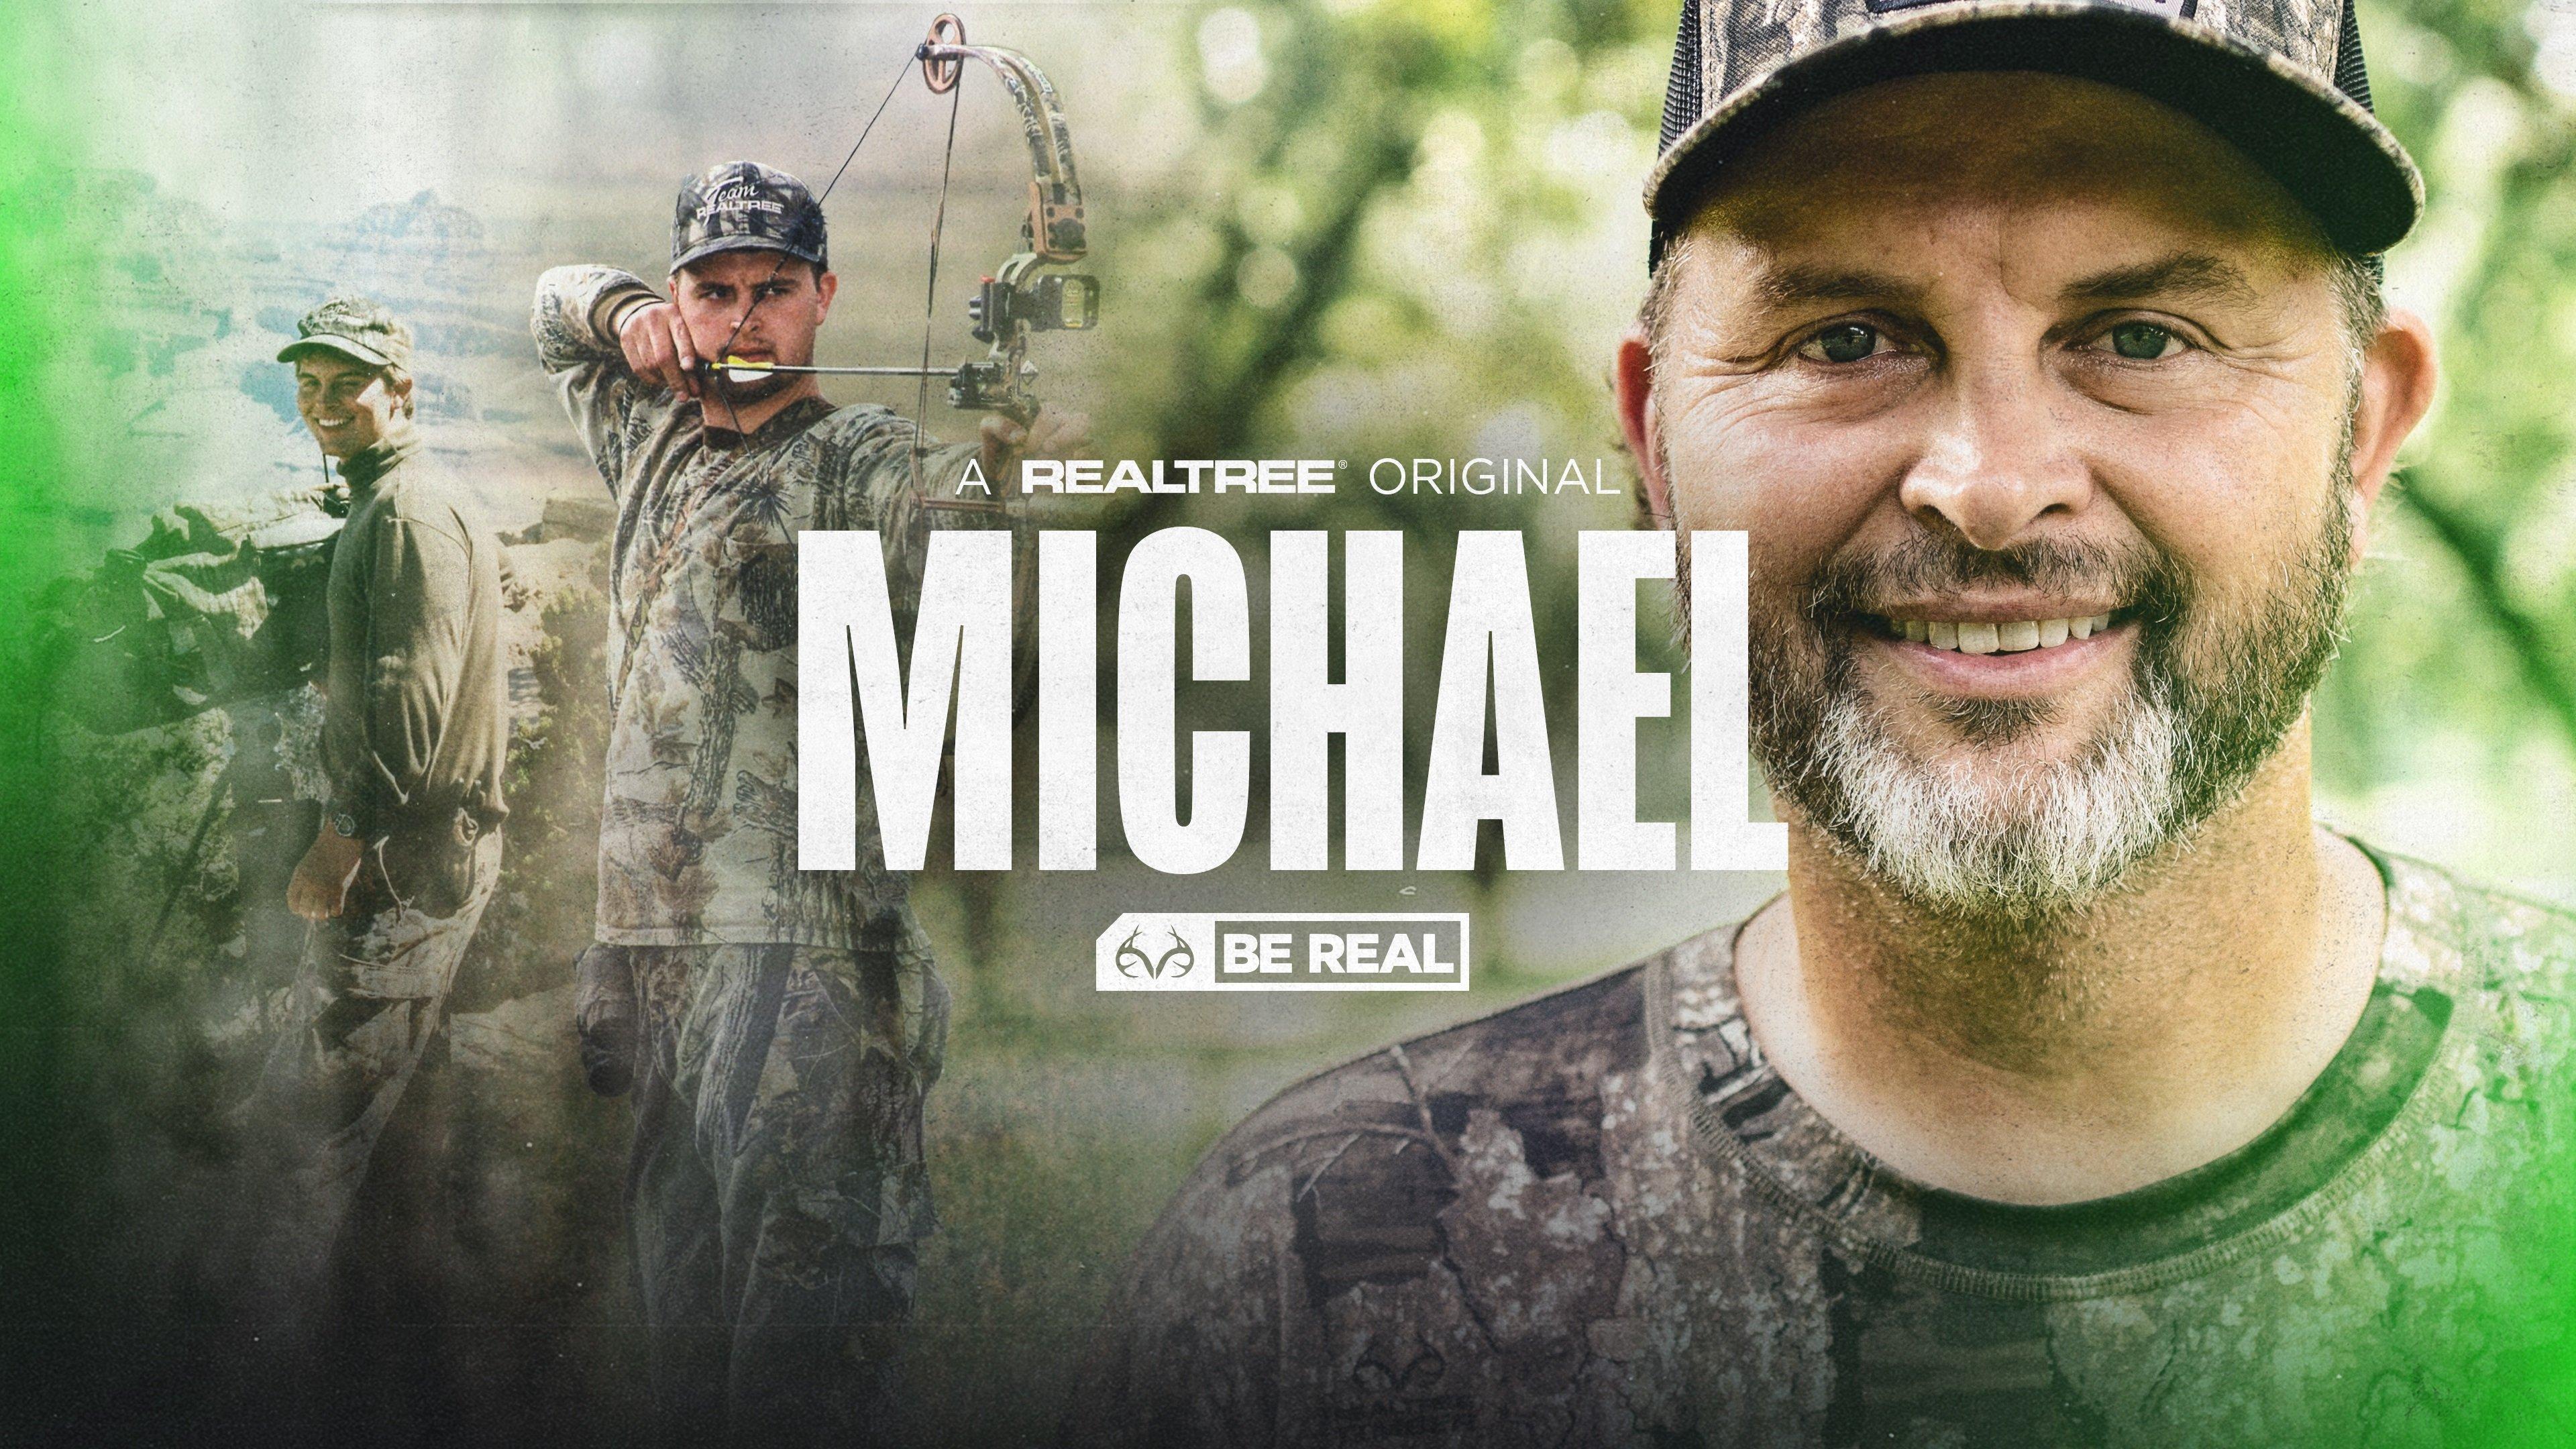 Michael Waddell was an air conditioner repairman before becoming one of the most famous hunters ever.  Image by Realtree